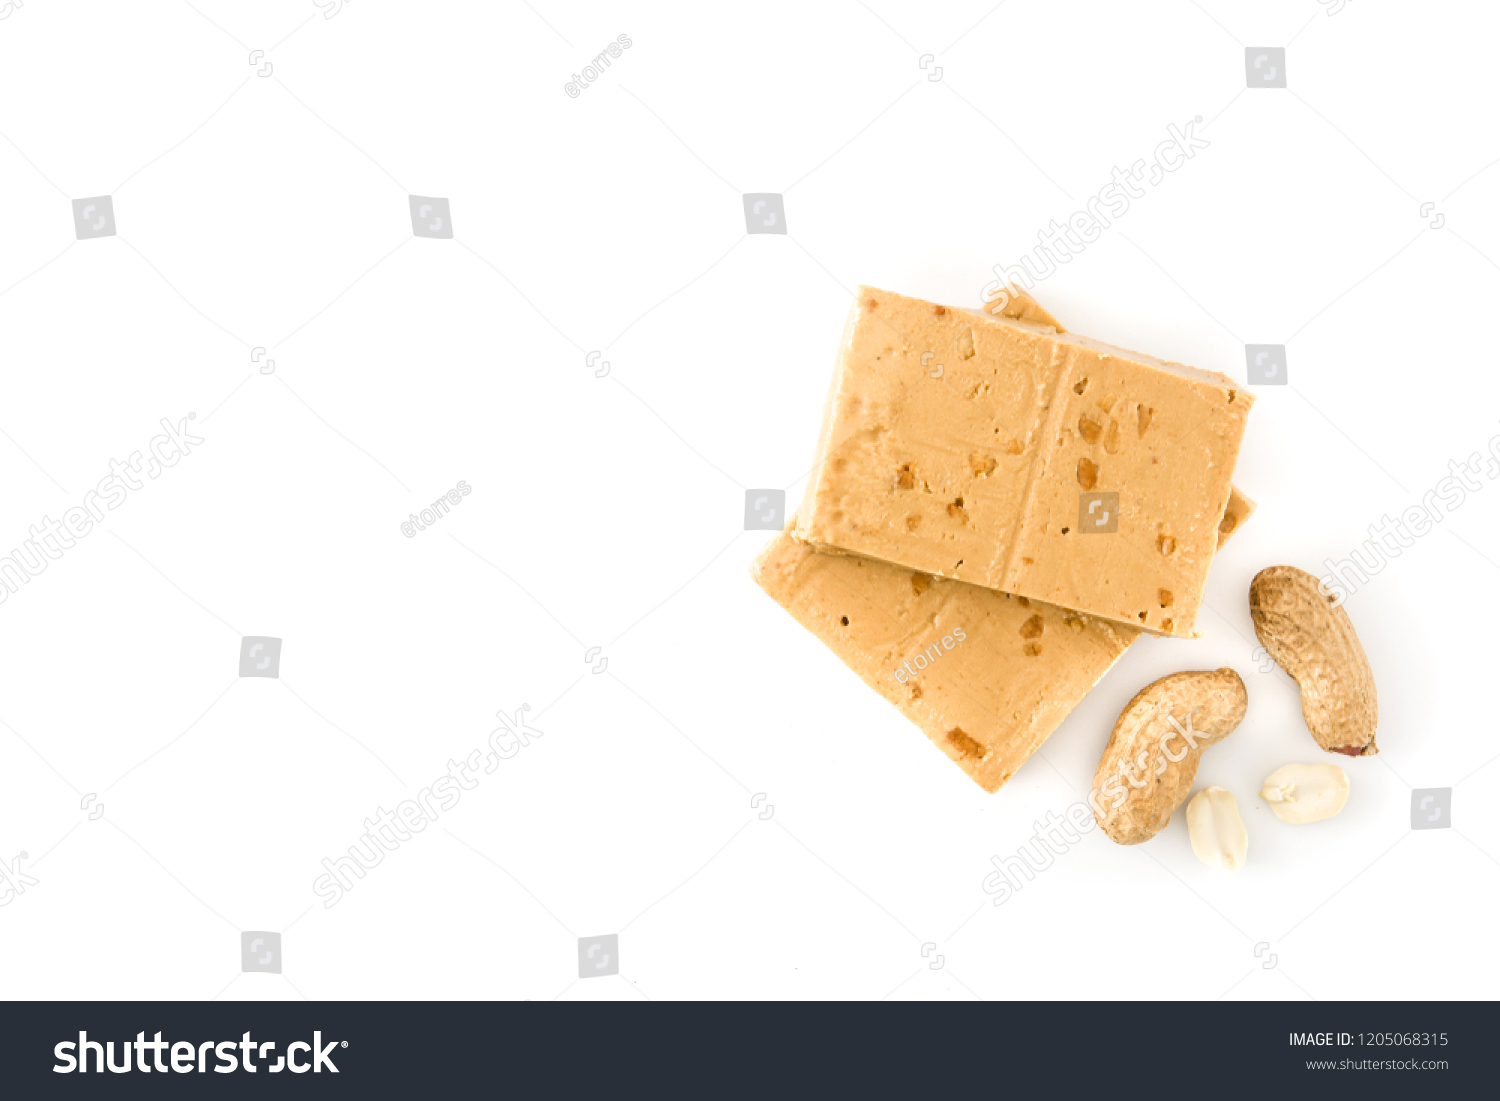 Peanut Christmas nougat isolated on white background. Typical Spanish.Top view. Copyspace #1205068315